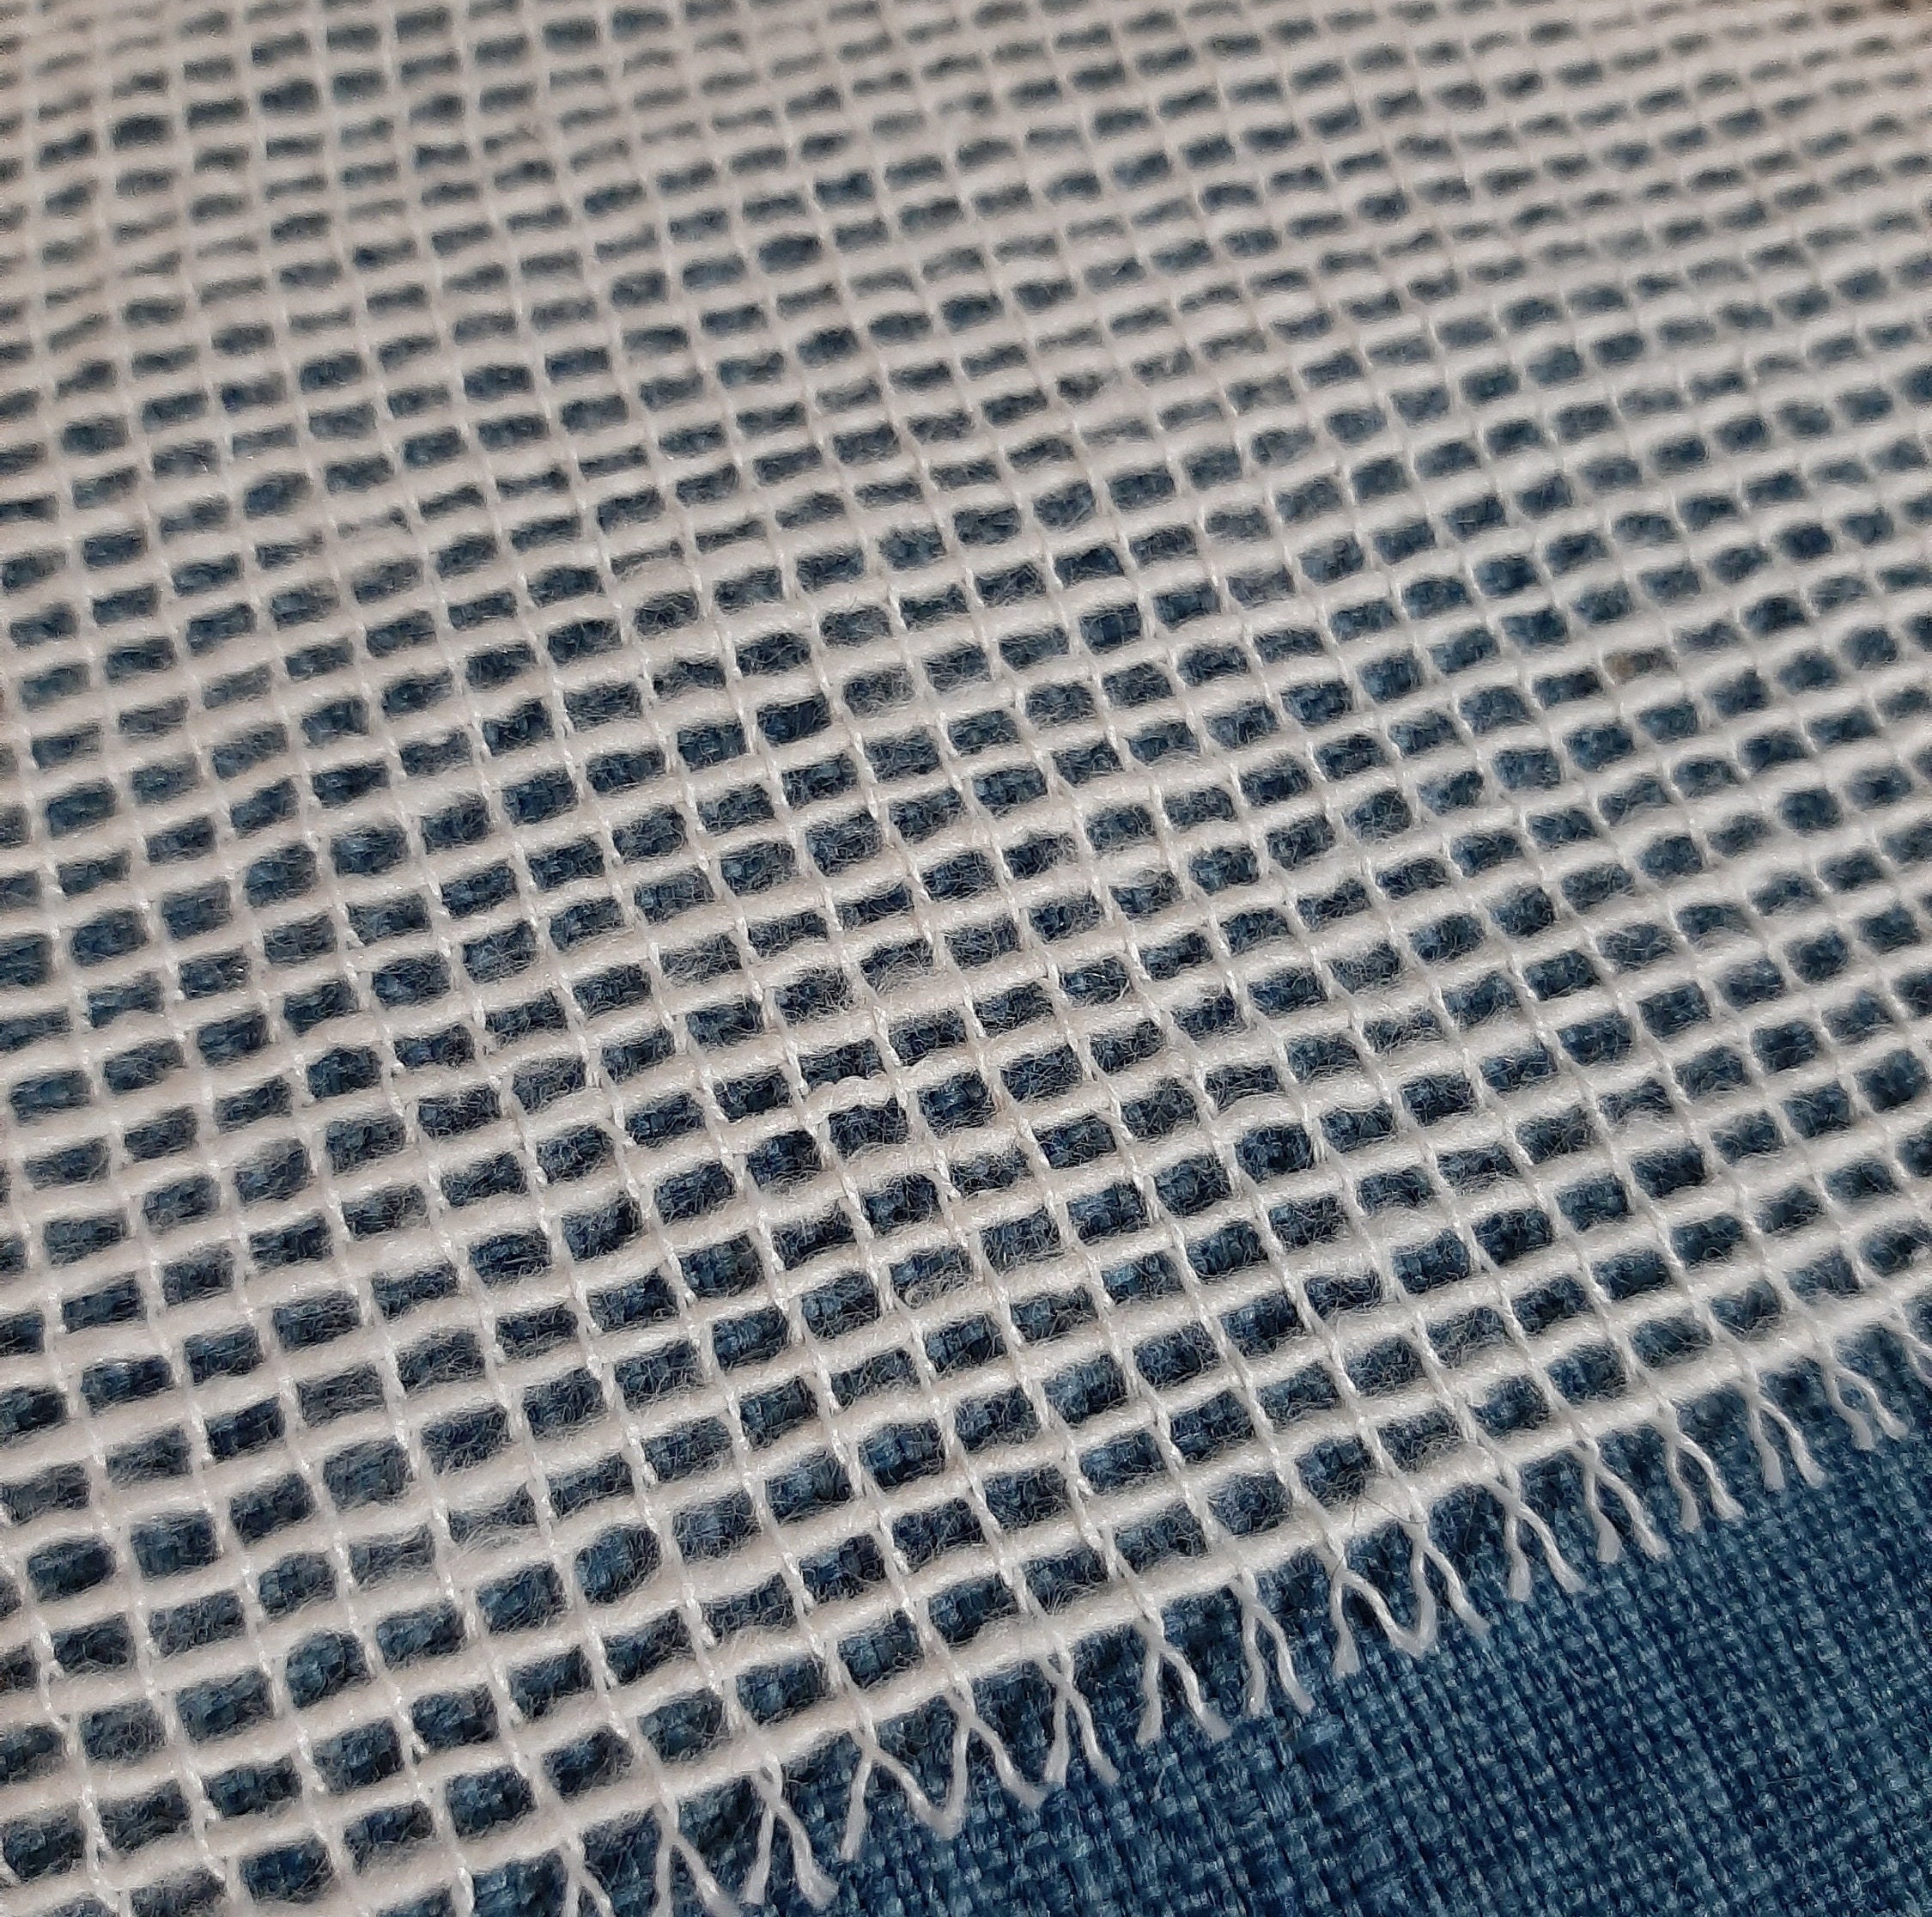 Secondary Backing Material for Finishing Tufted or Hooked Rugs